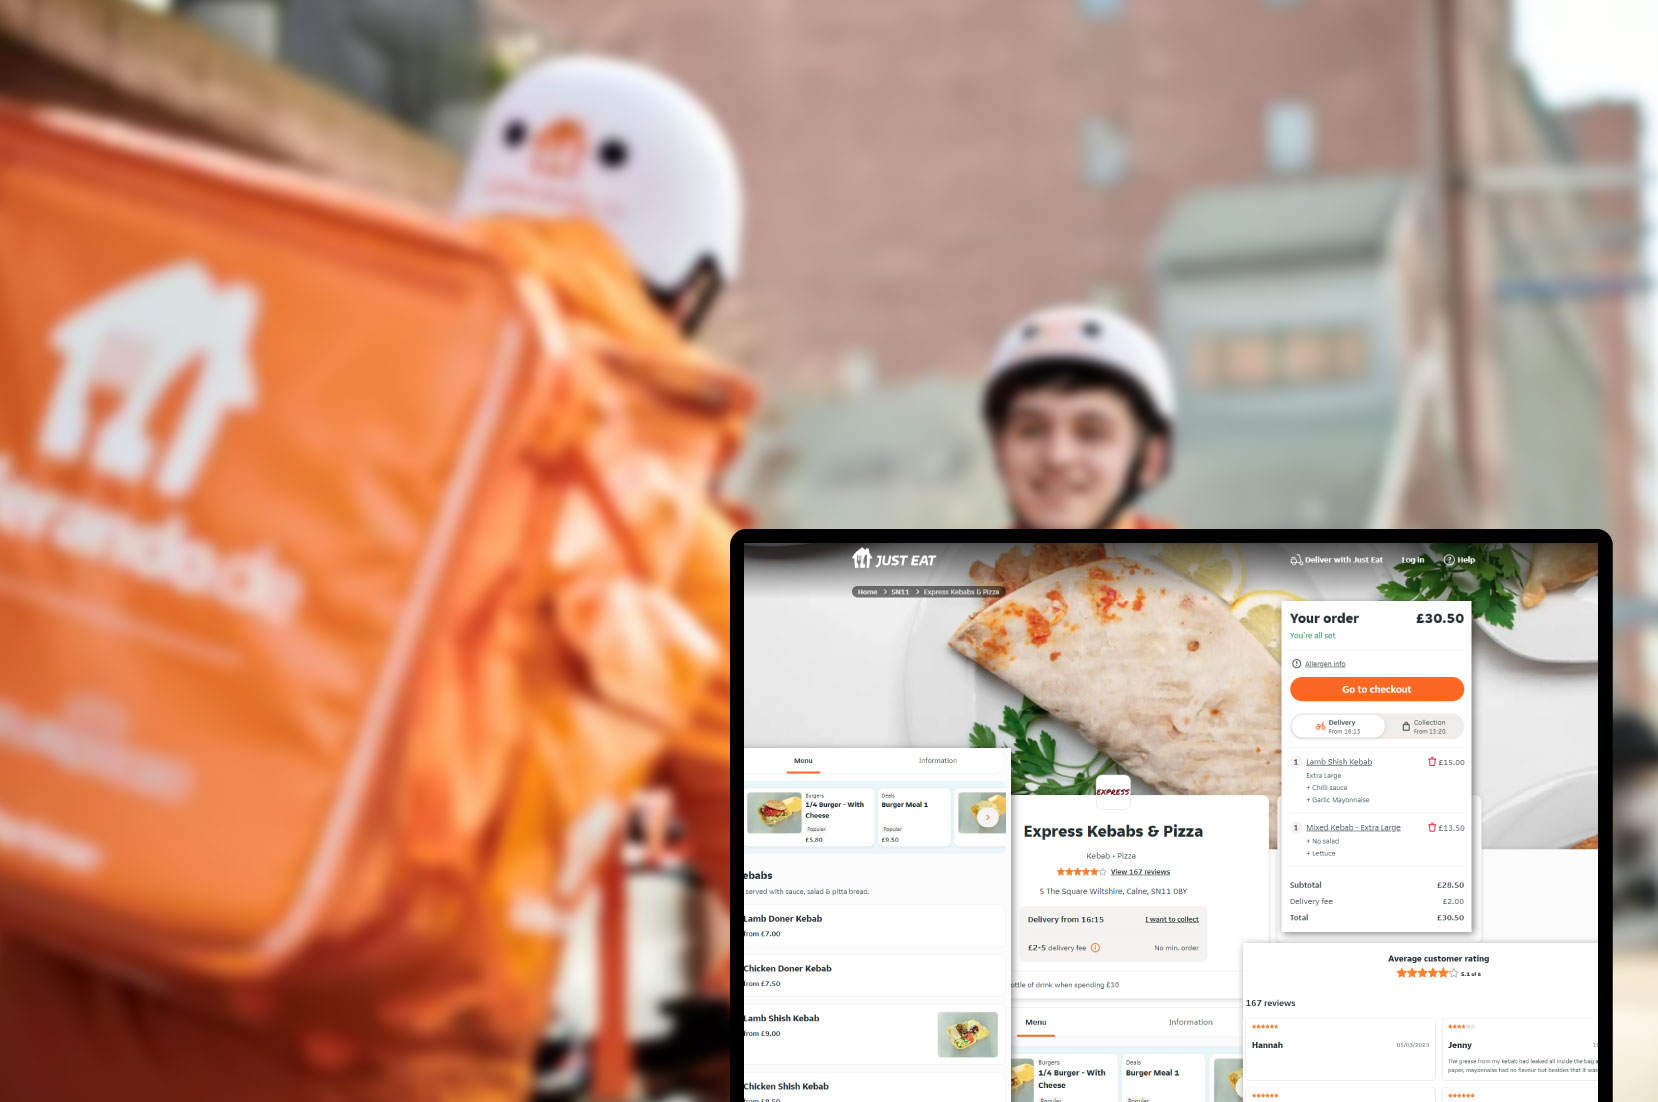 Scraping-JustEat-Food-Delivery-Restaurant-Data